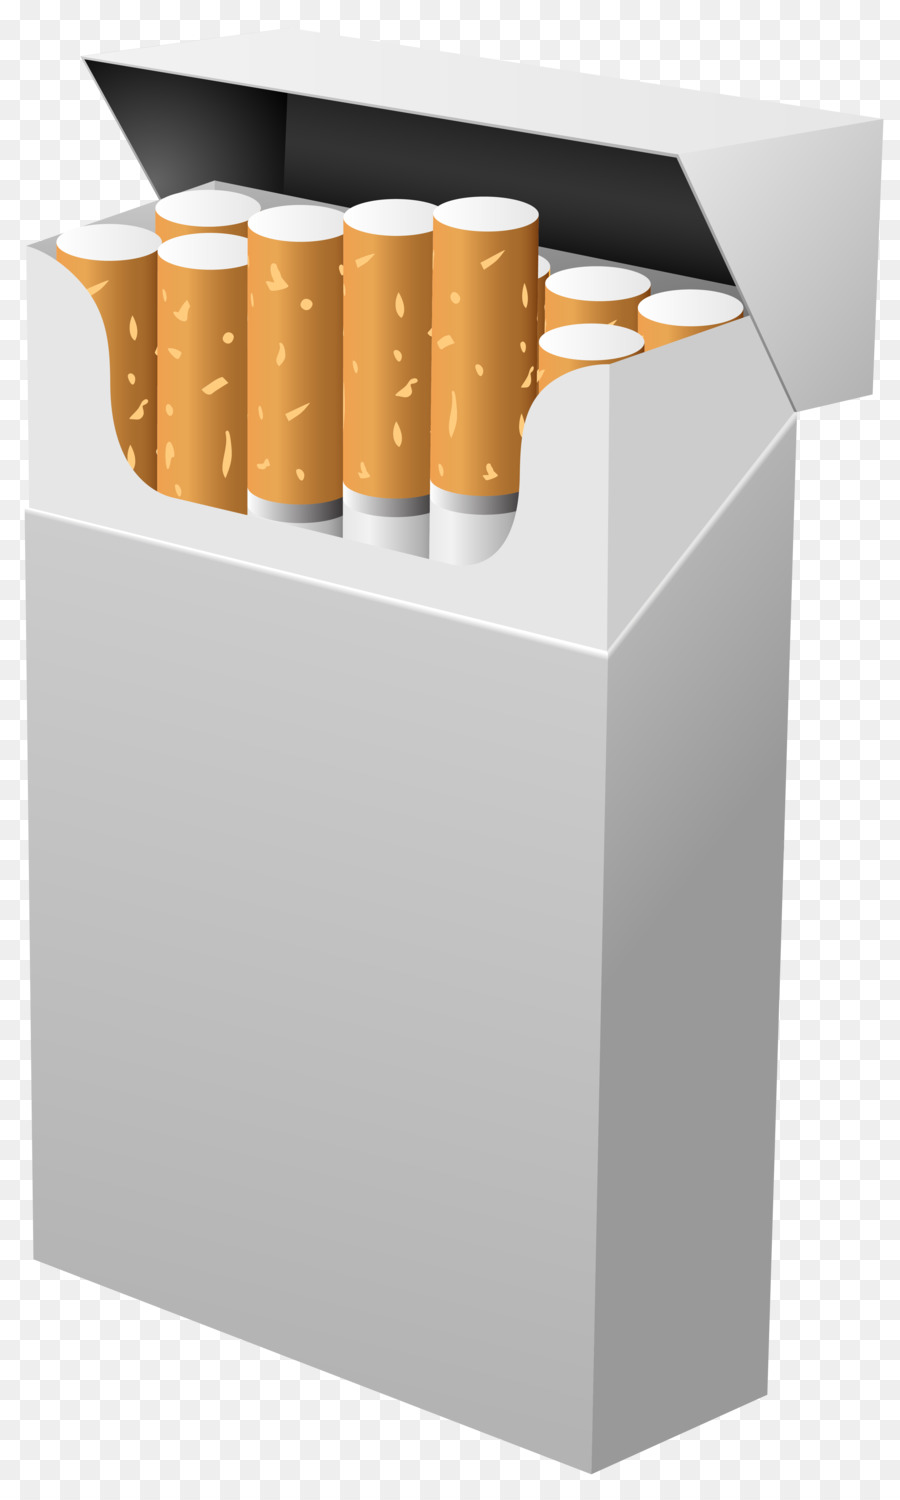 A pack of cigarettes image, A